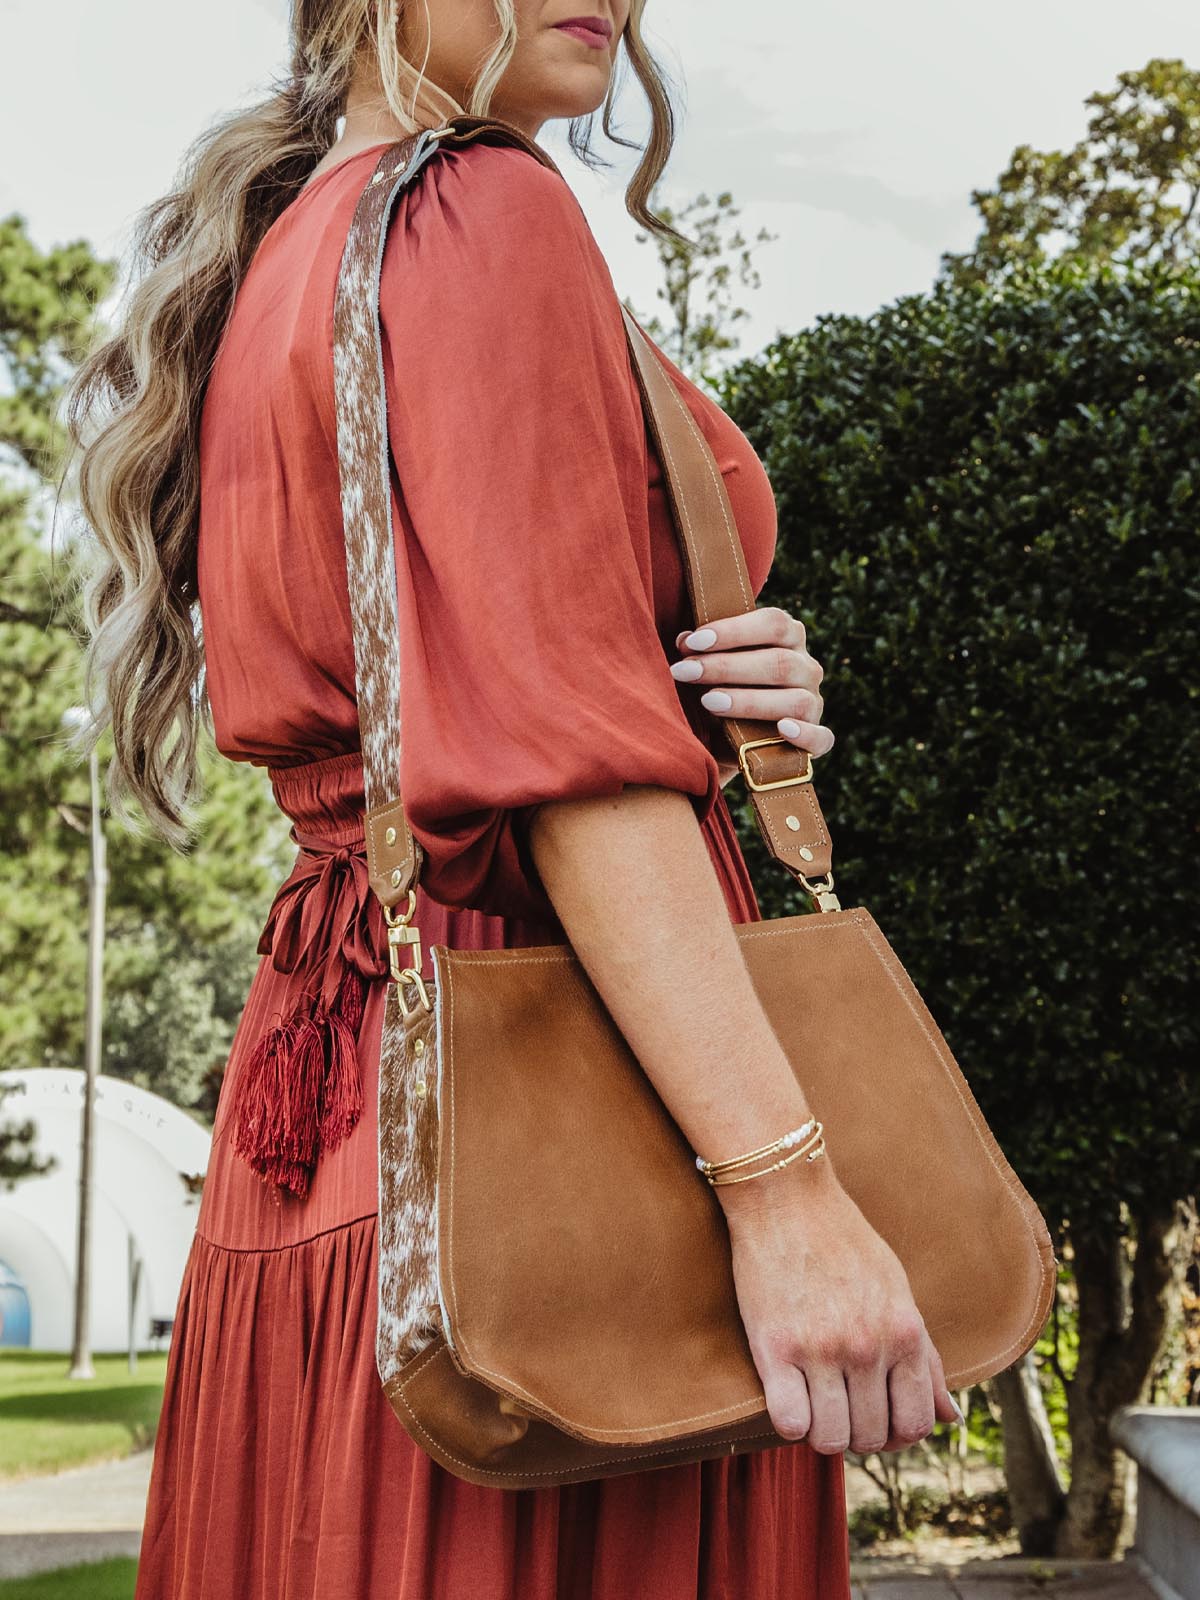 Brown leather bag worn by model in red dresss